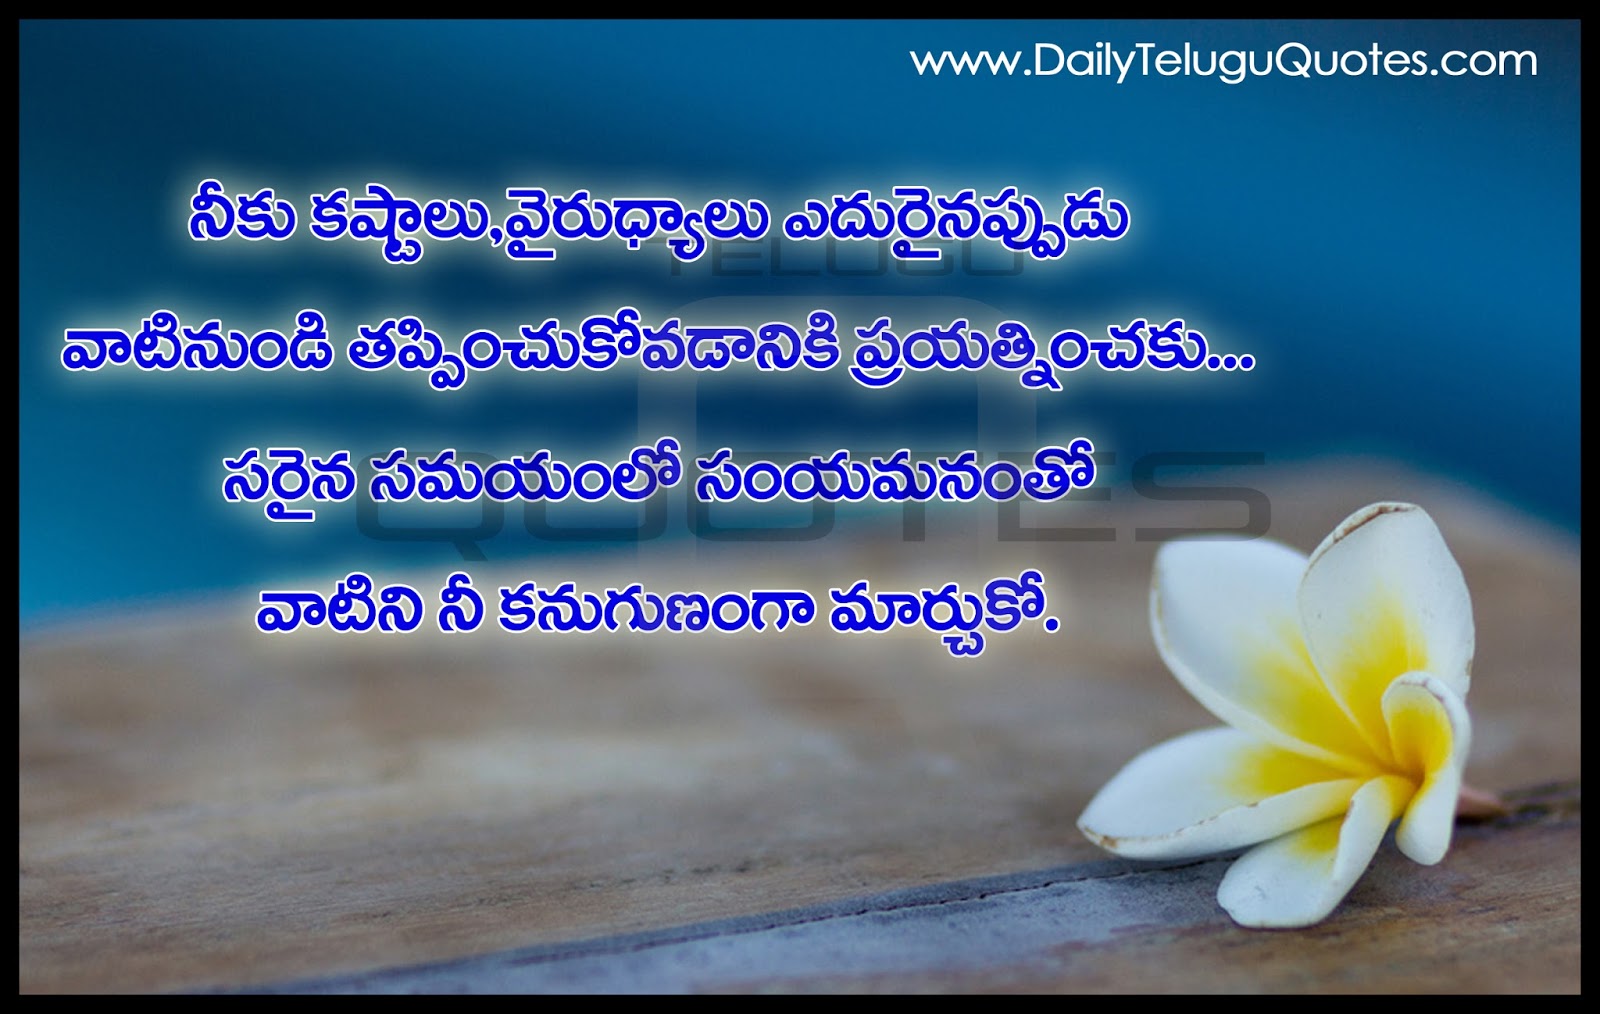 Best Inspiration Thoughts And Quotes In Telugu Dailyteluguquotes